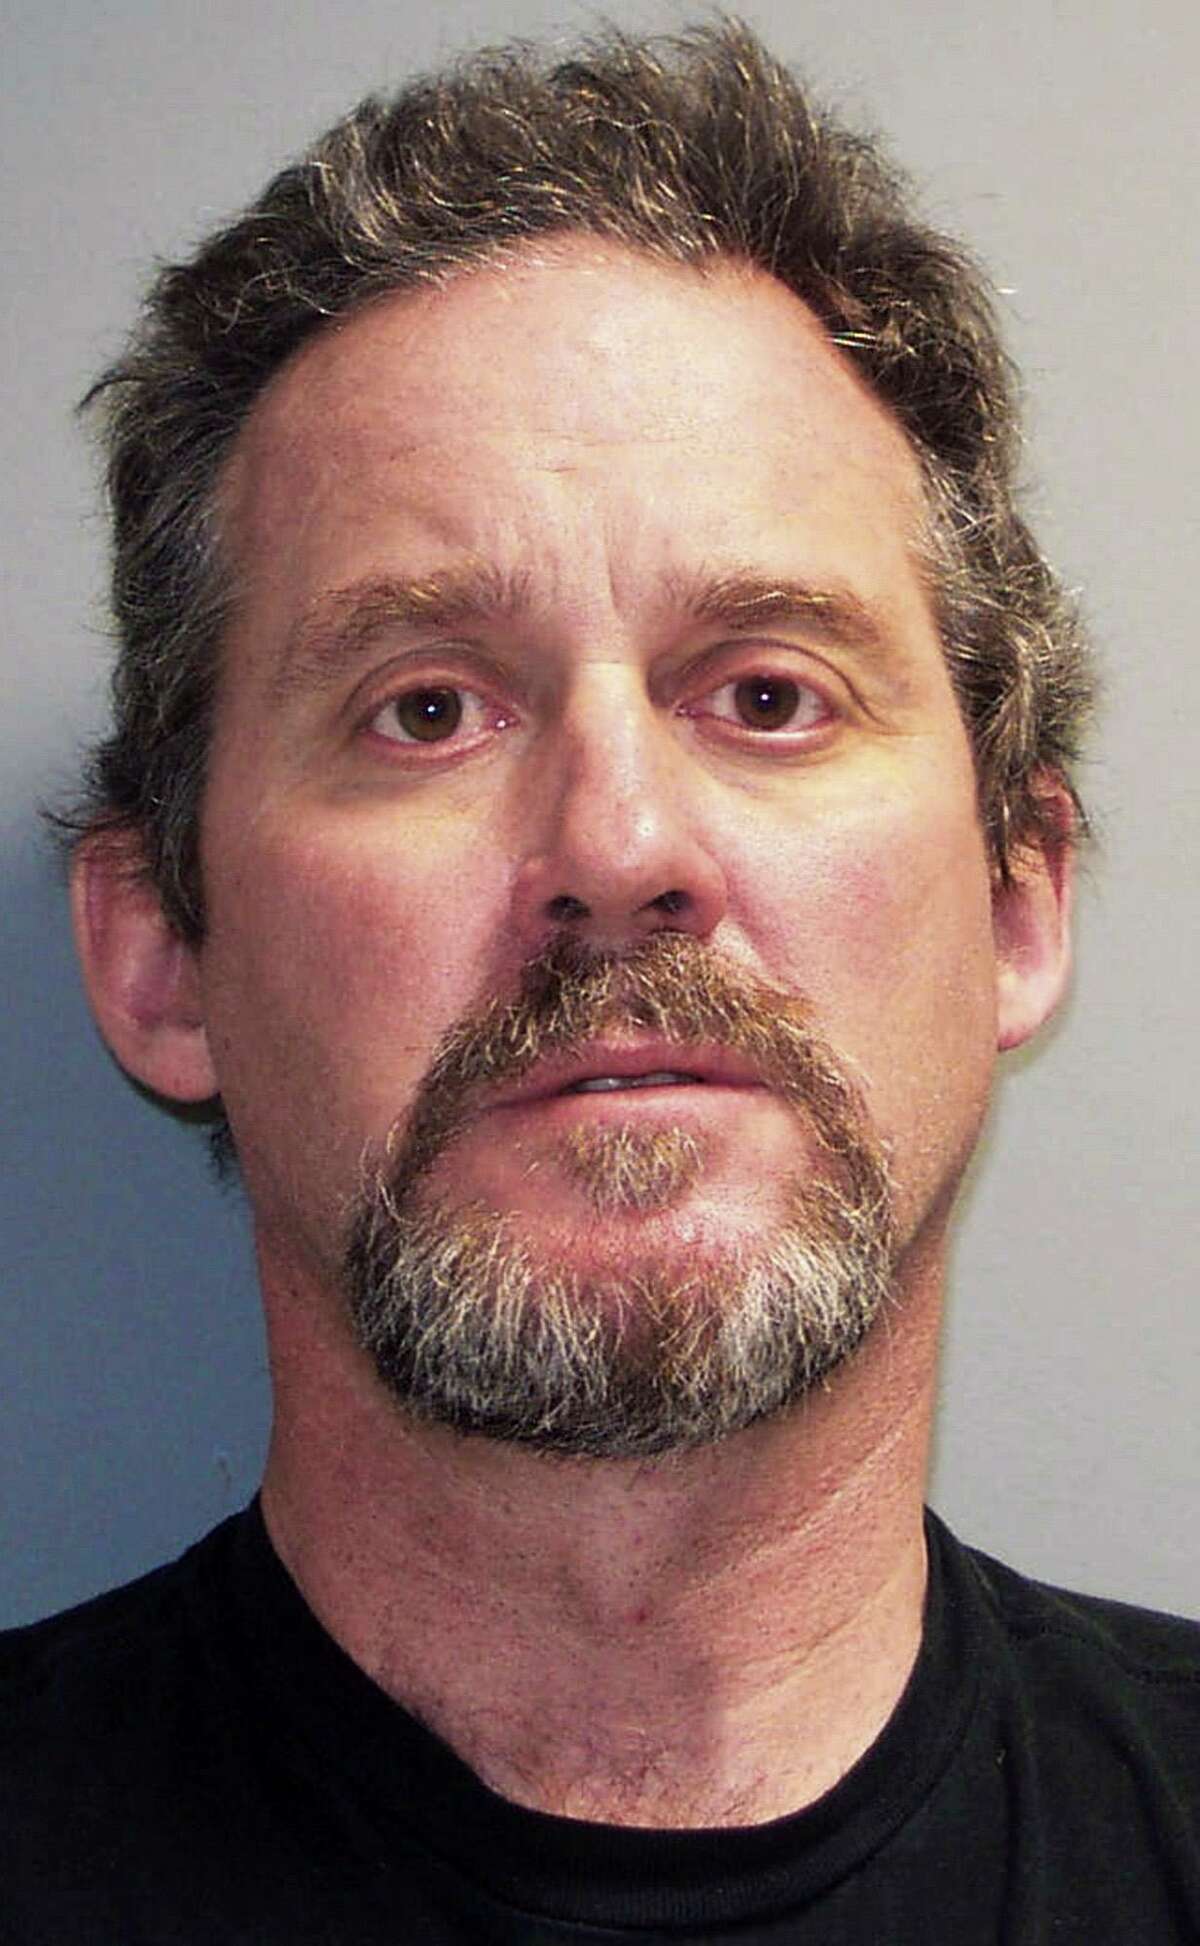 John Tate, 54, a teacher at Brien McMahon High School from Trumbull was arrested in 2010 and charged with second-degree sexual assault.